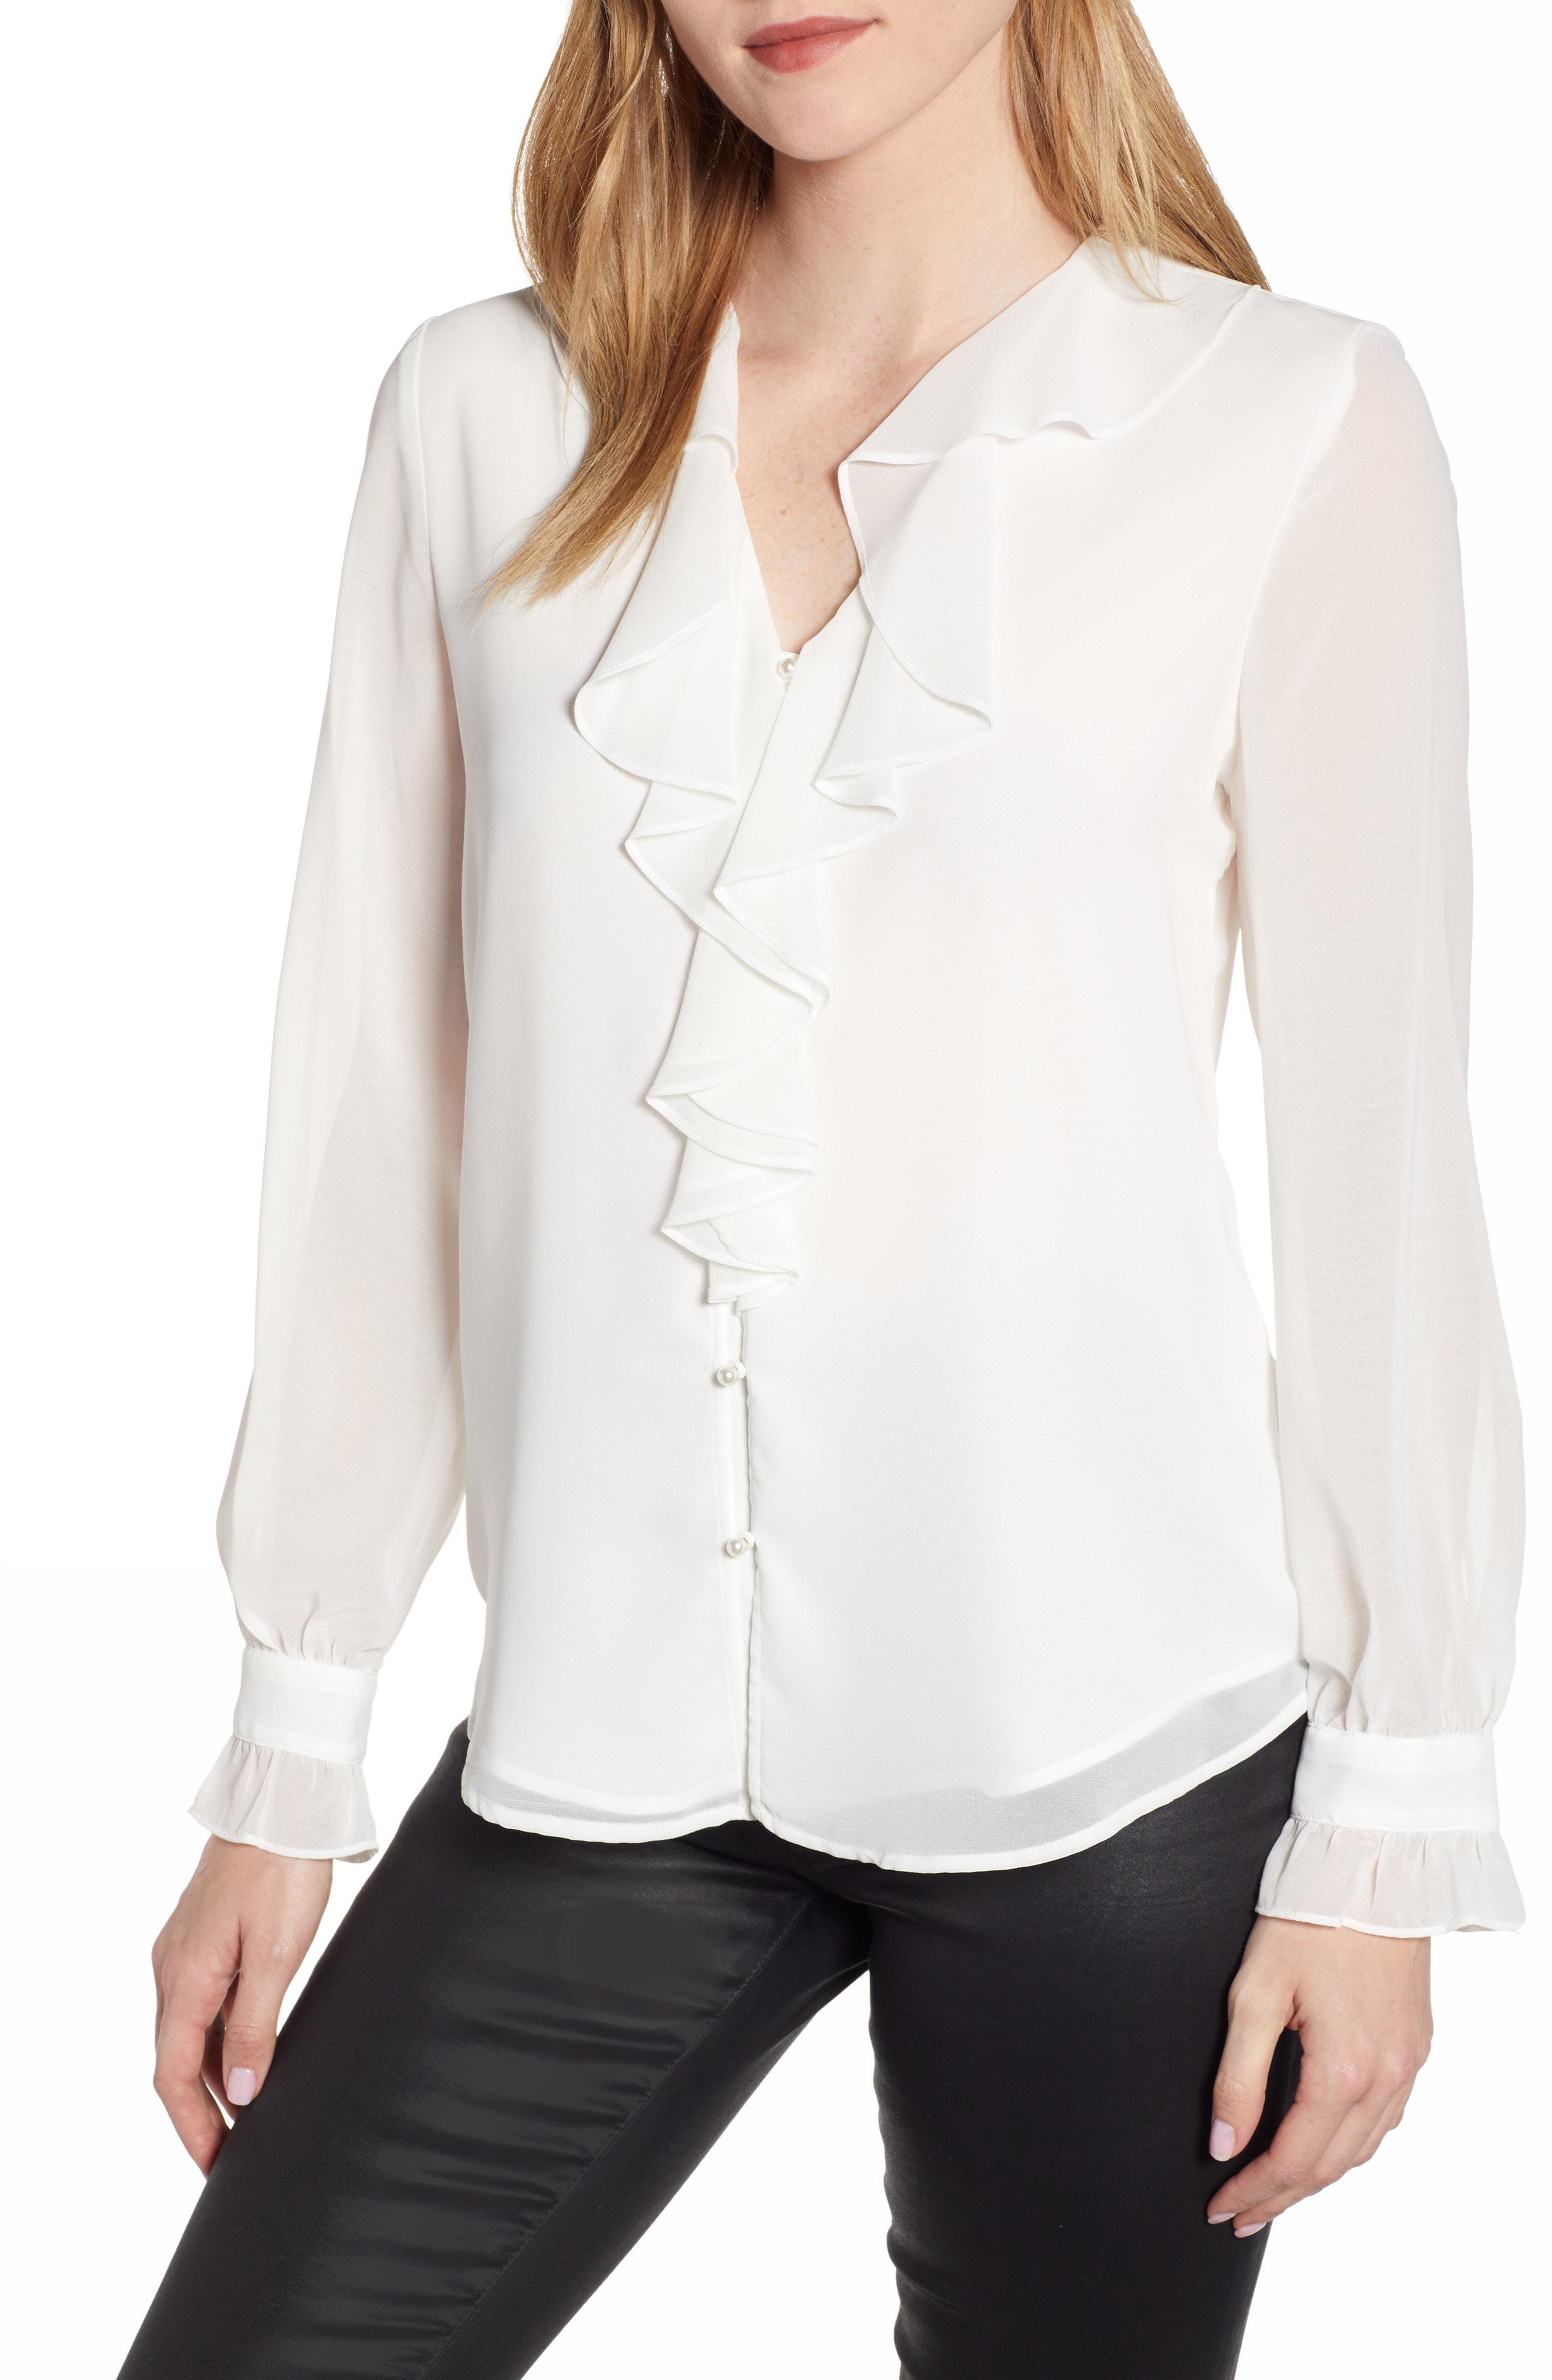 Karl Lagerfeld Ruffle Front Blouse in White - Lyst